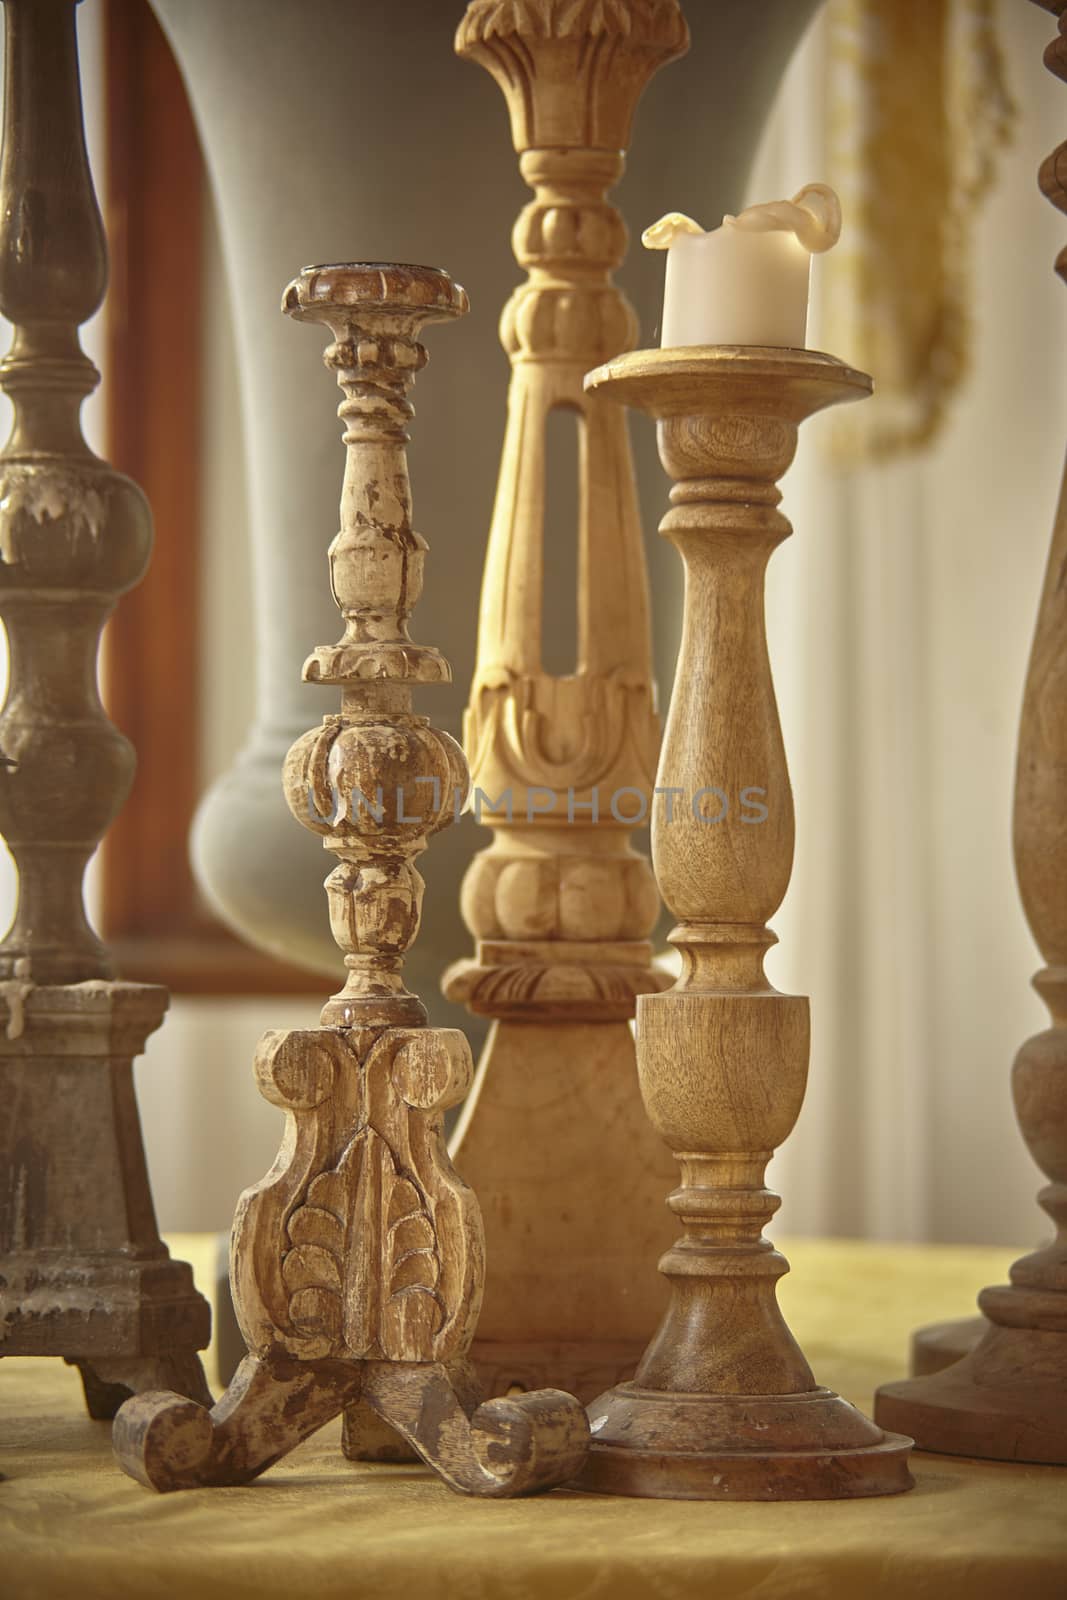 Vertical shot with vintage handmade wooden candlesticks used as furniture items.